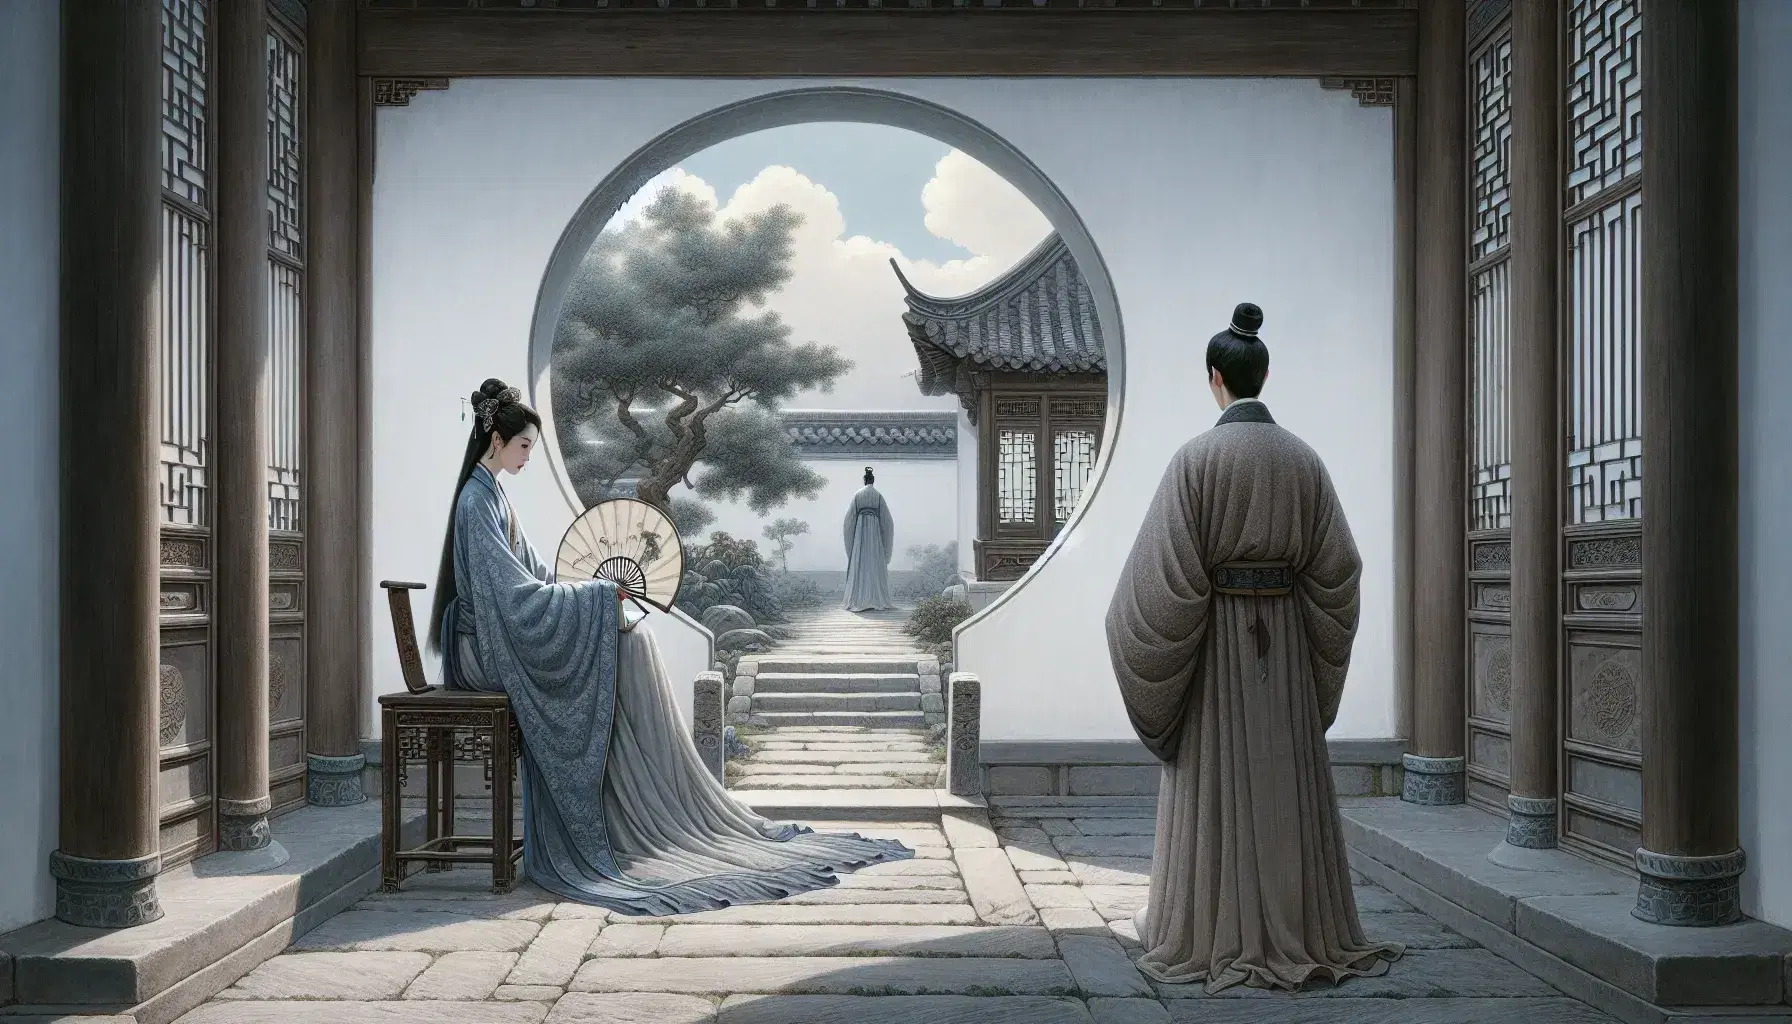 Traditional Chinese courtyard scene with a woman in a blue Song Dynasty robe sitting on a stool and a man in a neutral robe facing a moon gate and garden.